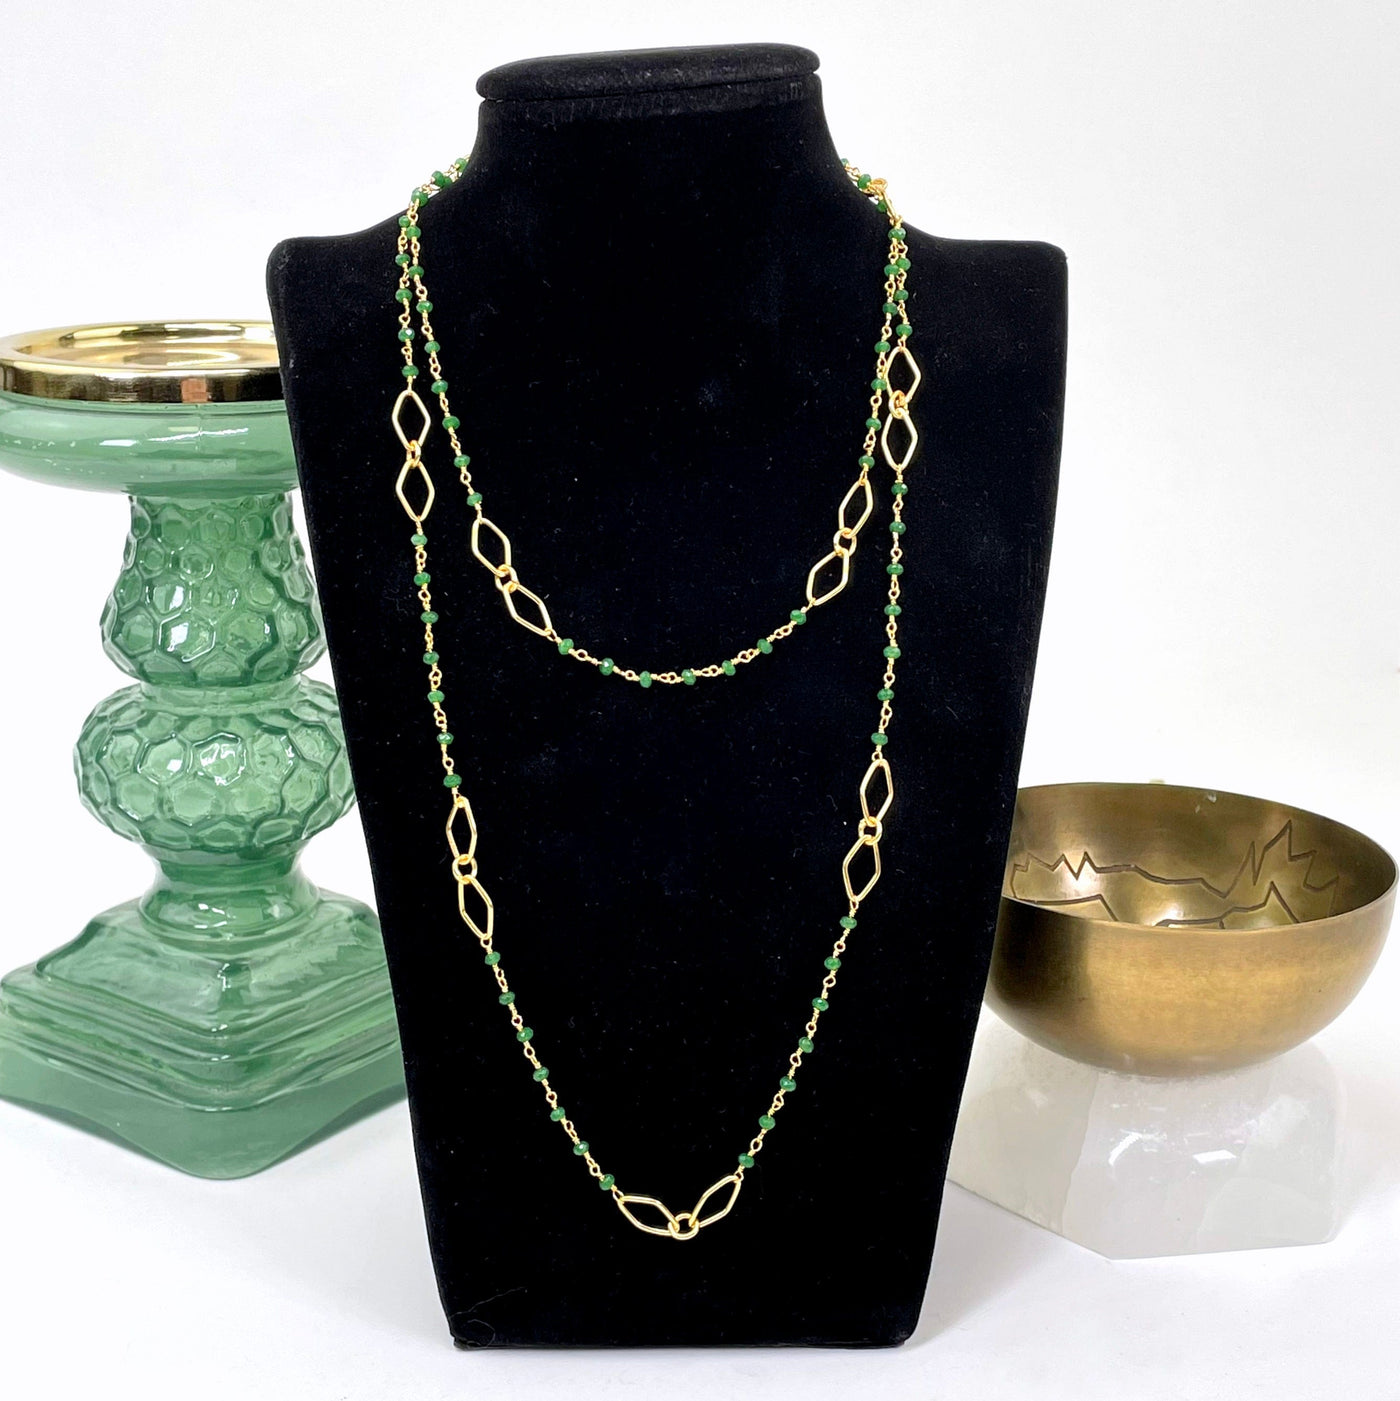 full green onyx beaded chain necklace length wrapped twice around a bust display